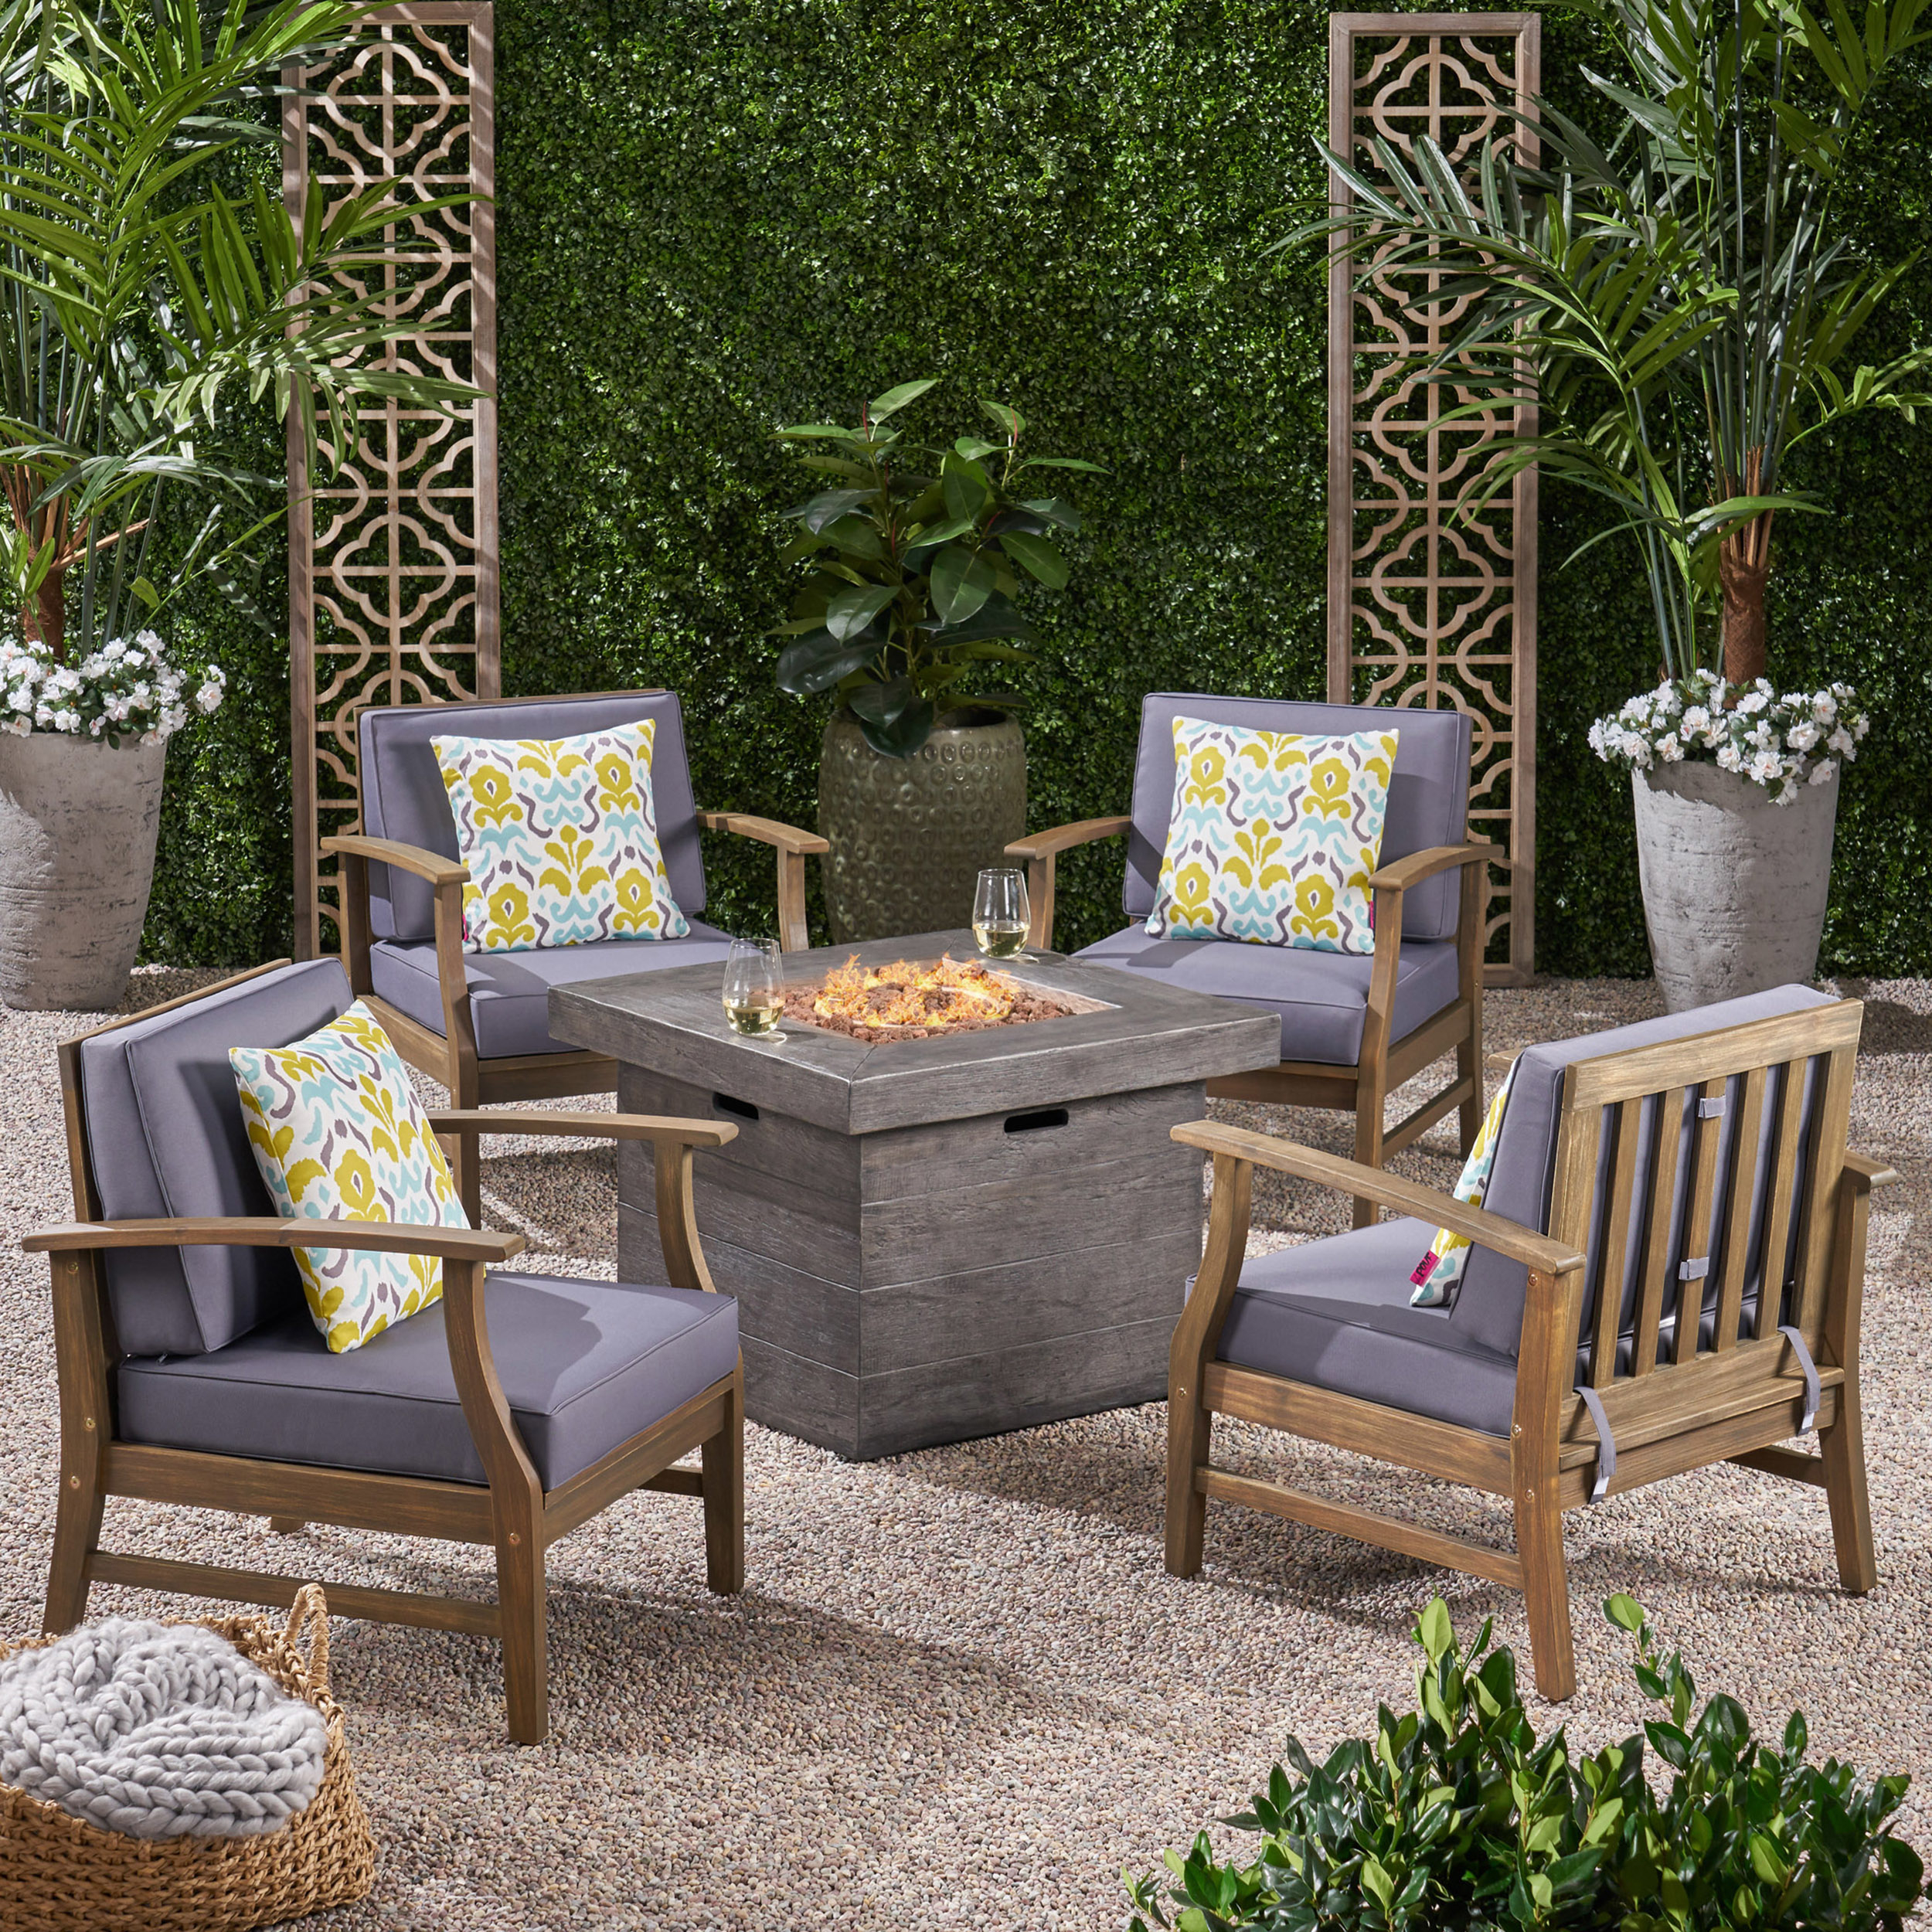 Easter Outdoor 4 Seat Teak Finished Acacia Wood Club Chairs Fire Pit Chat Set - Gray + Dark Gray